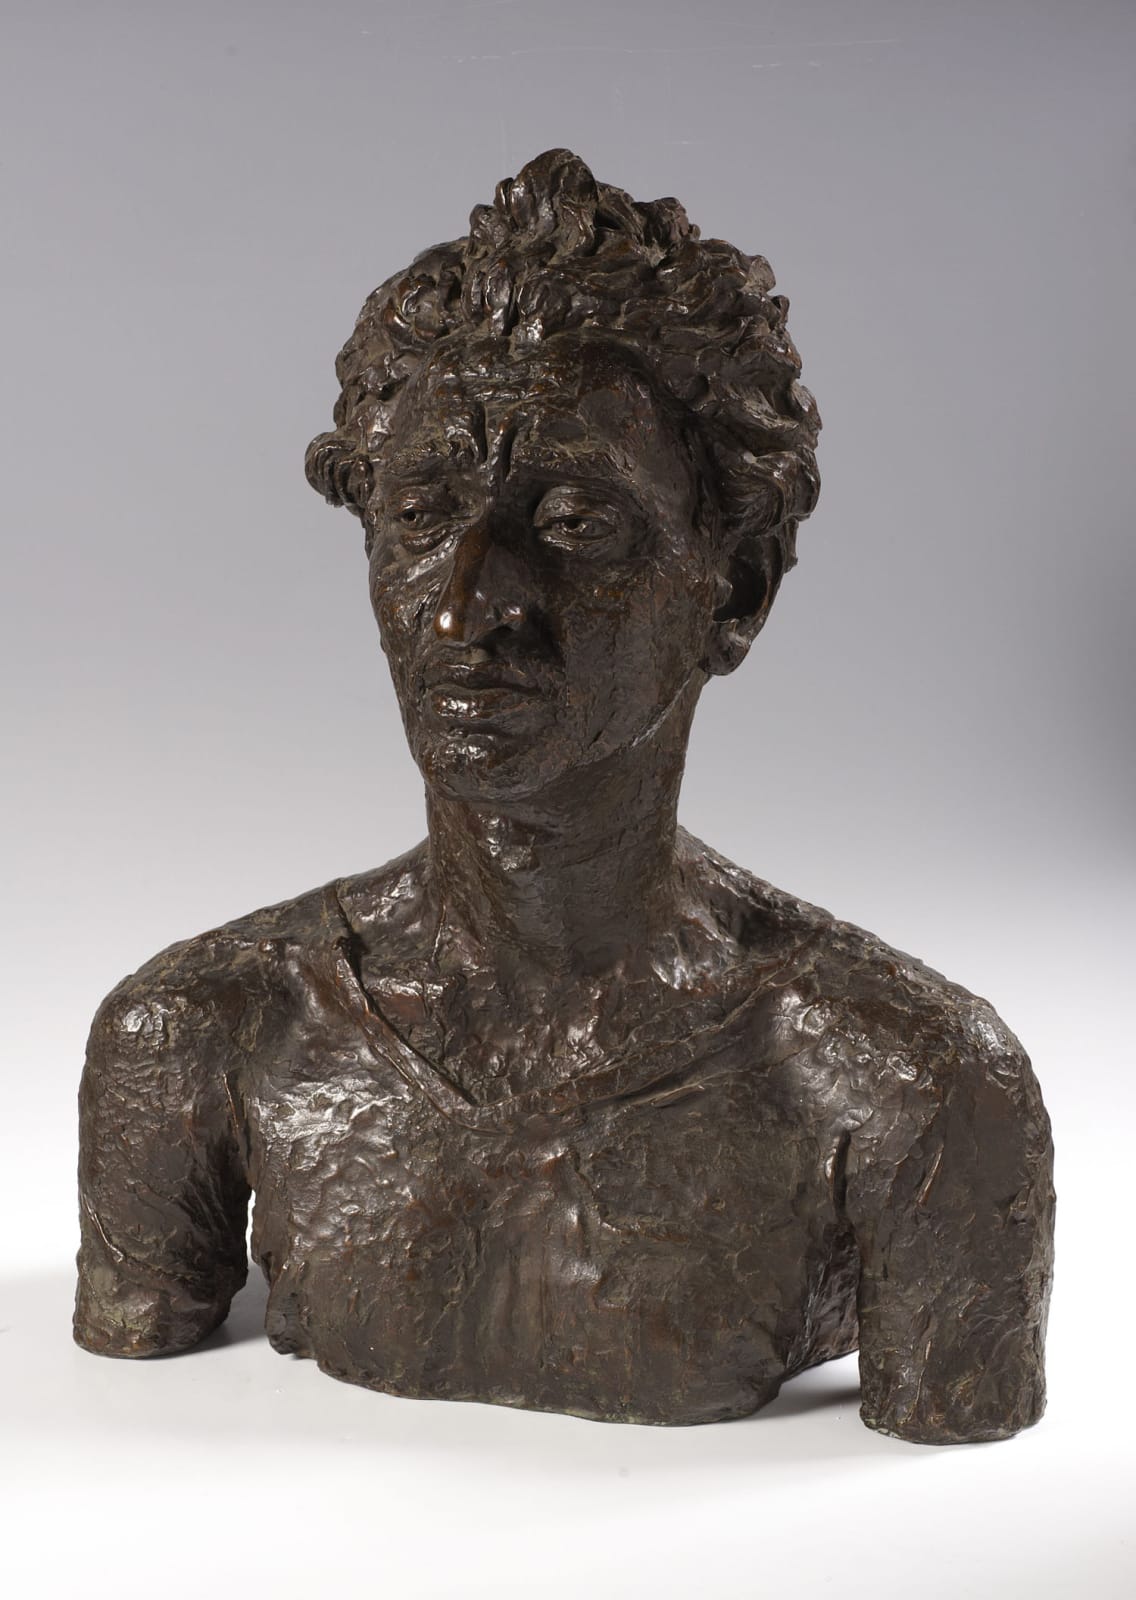 Jacob Epstein (1880-1959) Bust of Jacob Kramer 1921 Bronze 64 x 49 x 25 cm Ben Uri Collection © The estate of Jacob Epstein To see and discover more about this artist click here